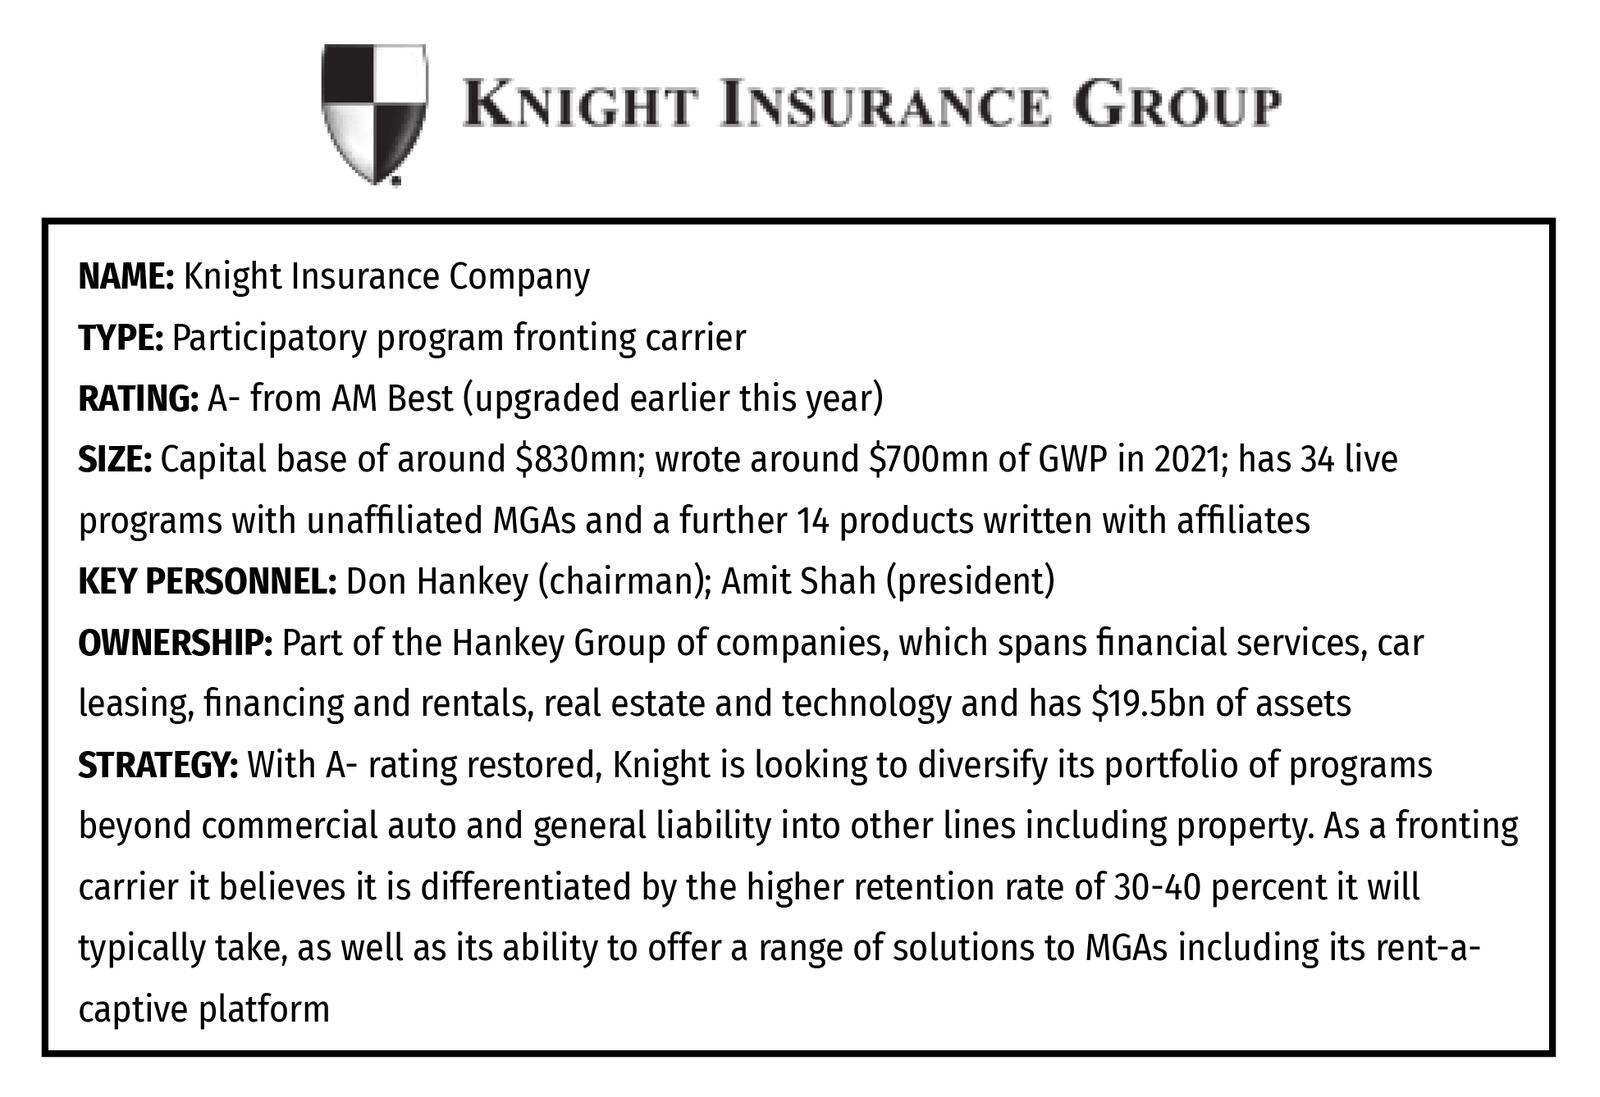 Knight Insurance Company on the front foot after A- return